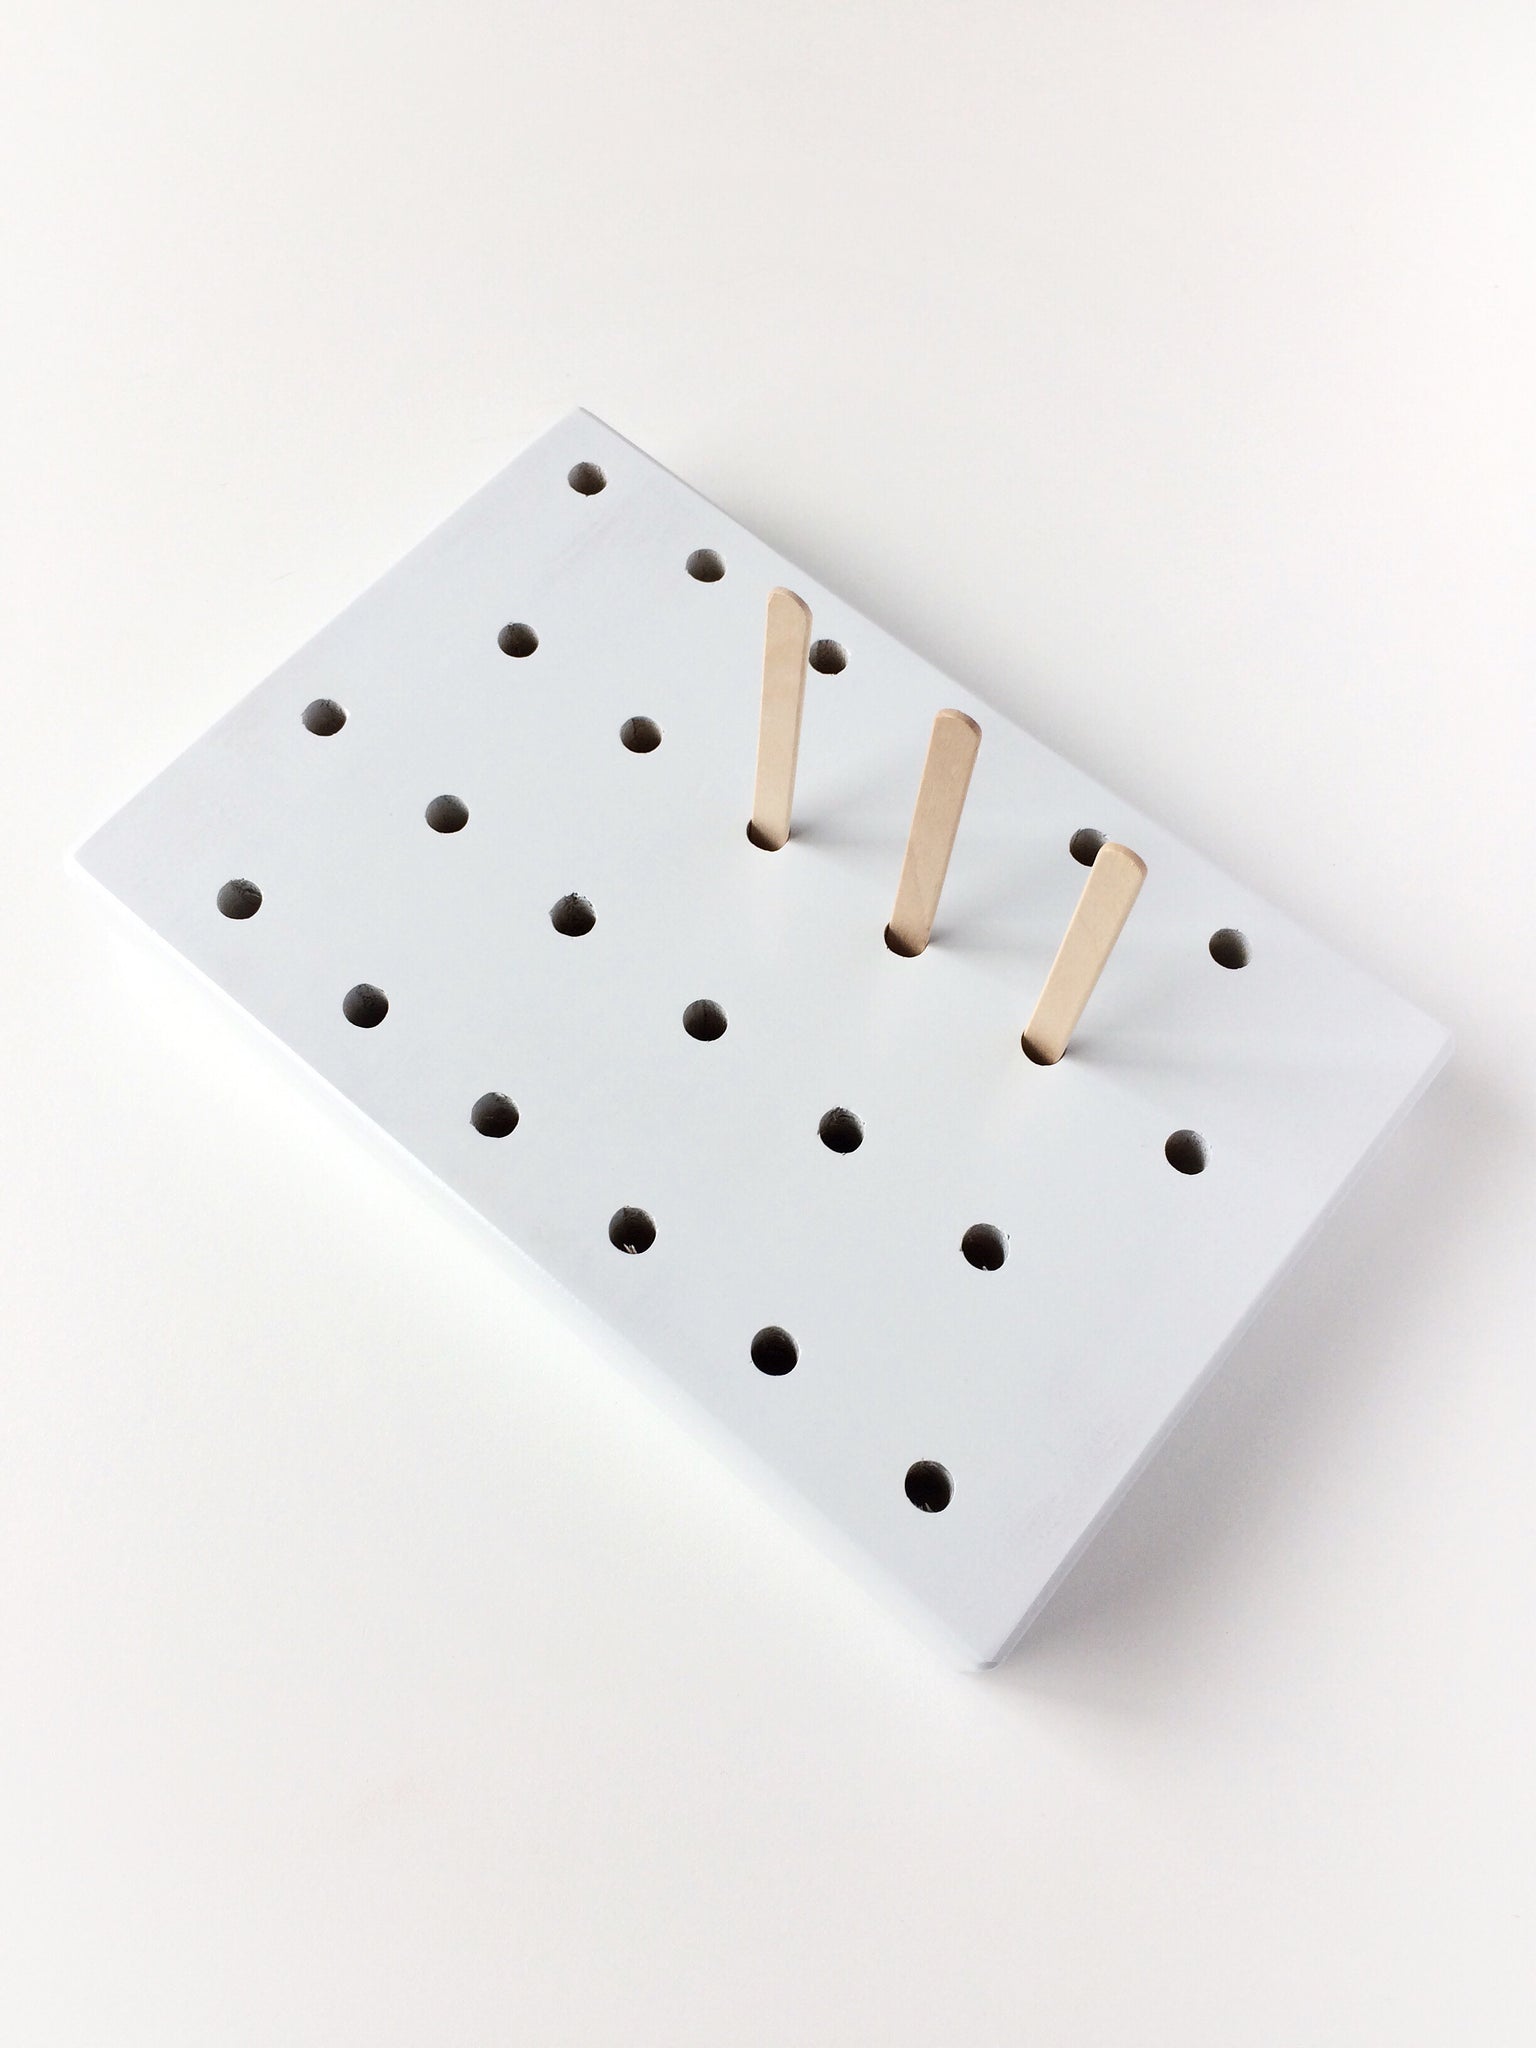 5 in 1 (Cake Pop & Cakesicle Stand) 12 hole